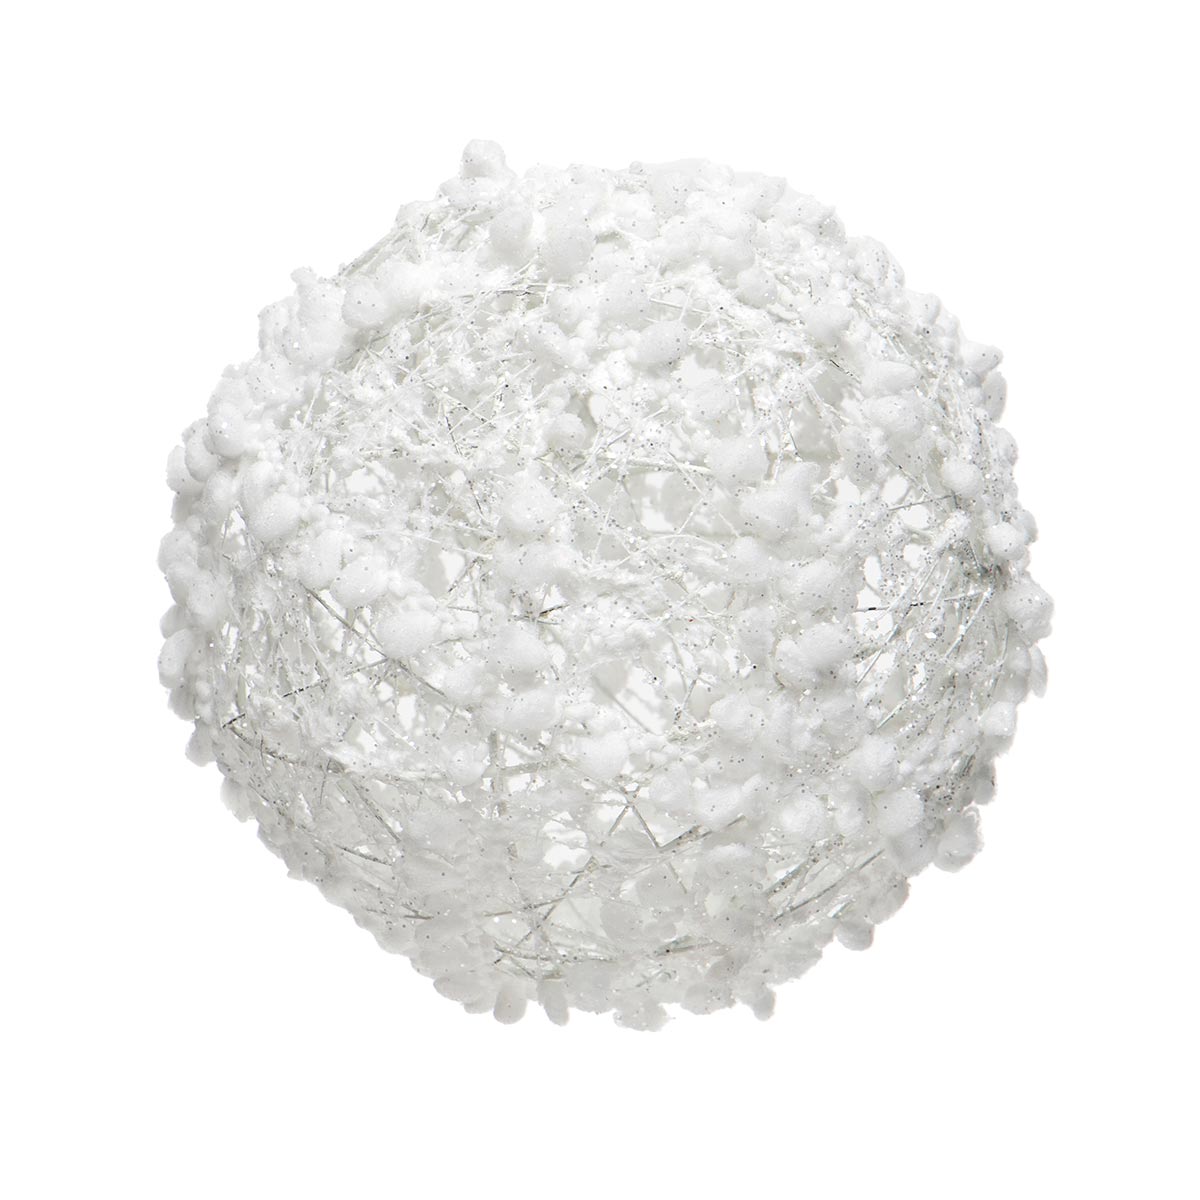 WHITE PUFF BALL ORNAMENT WITH GLITTER & MICA LARGE 6"